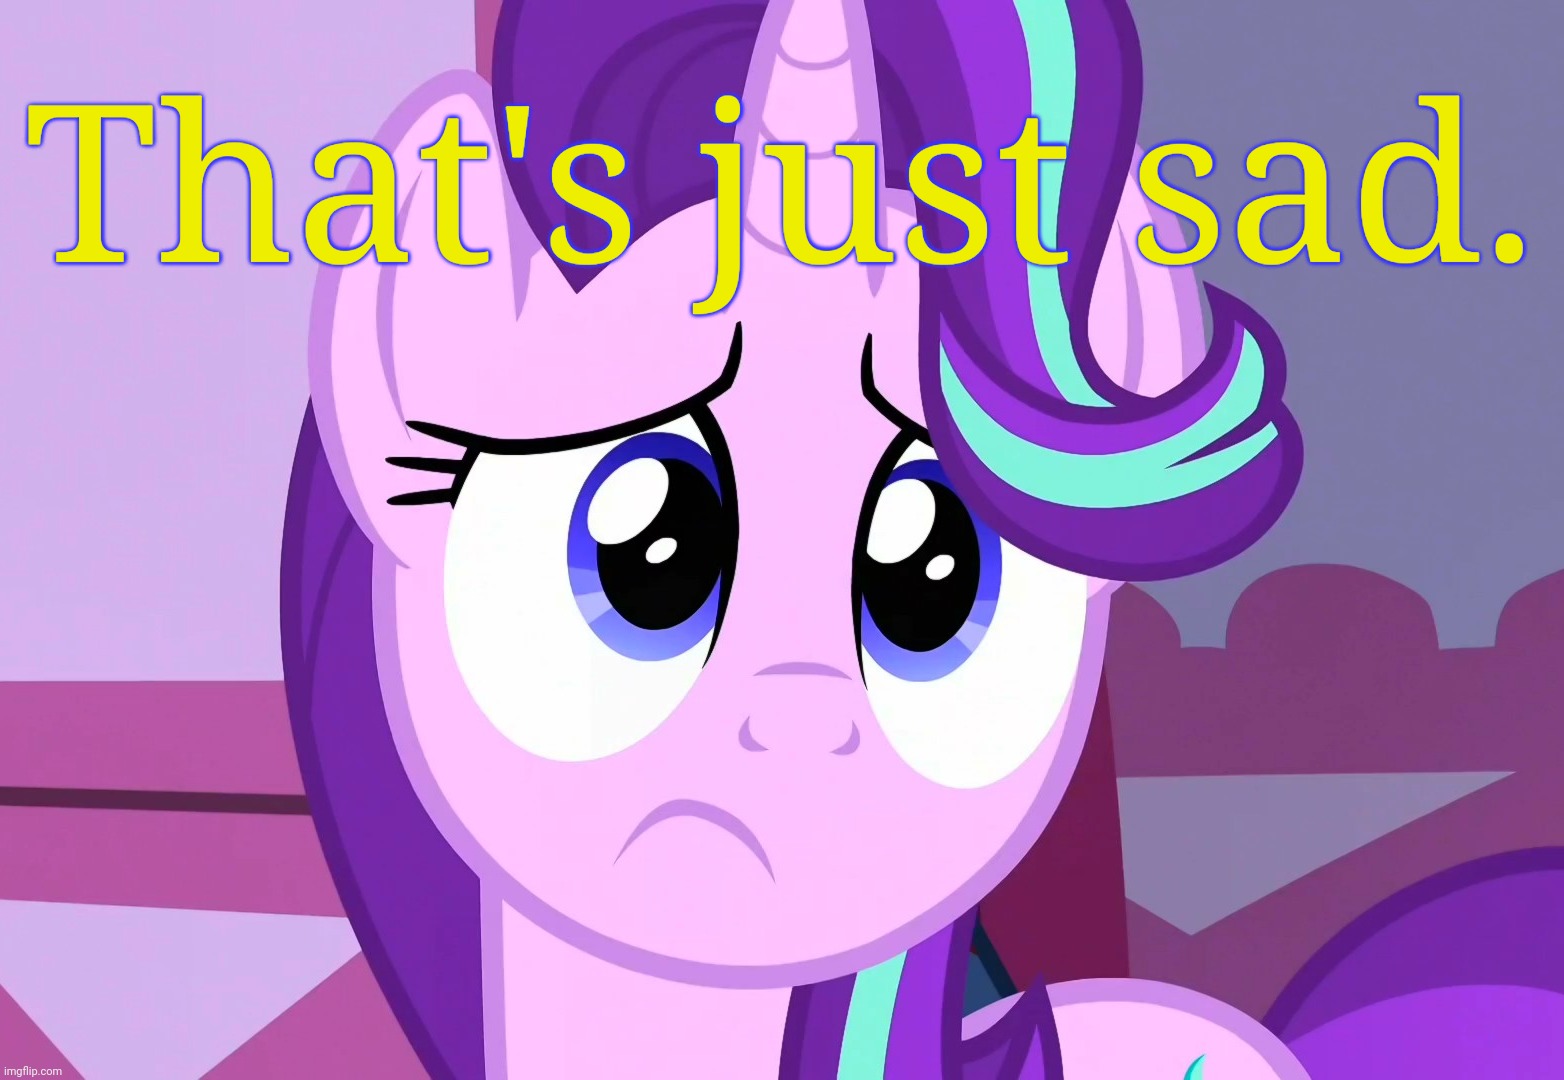 Sadlight Glimmer (MLP) | That's just sad. | image tagged in sadlight glimmer mlp | made w/ Imgflip meme maker